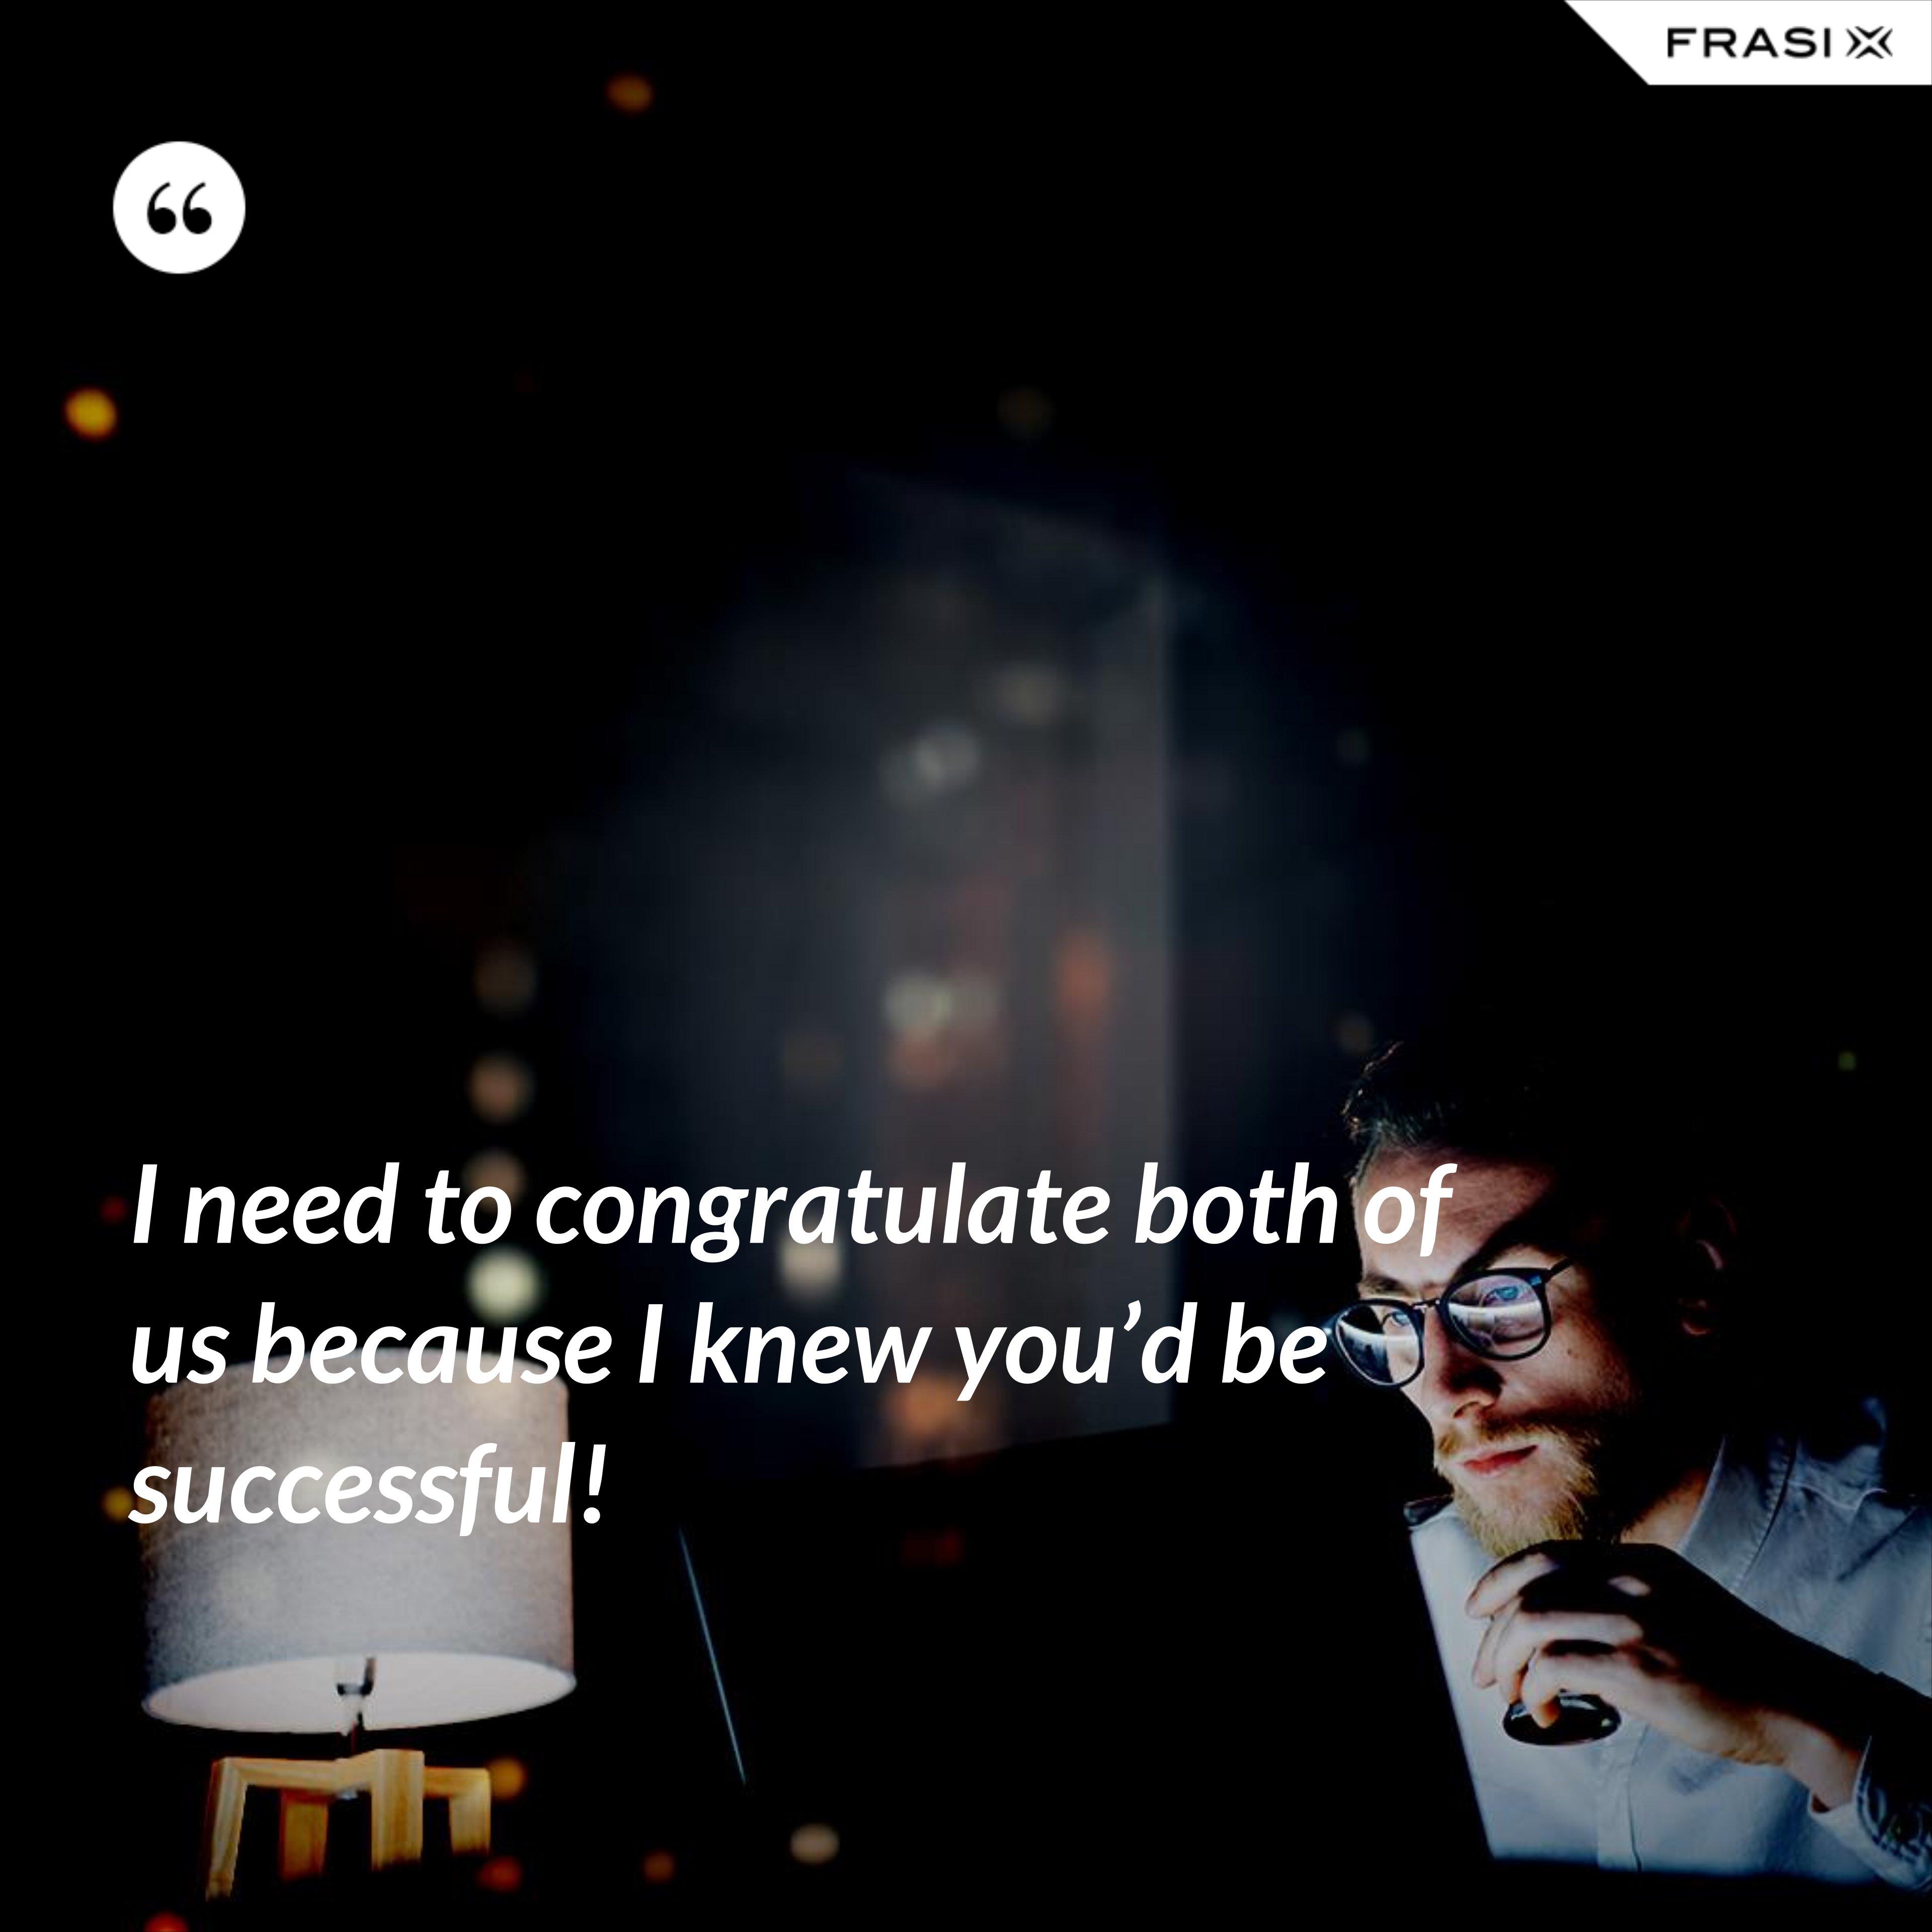 I need to congratulate both of us because I knew you’d be successful! - Anonimo